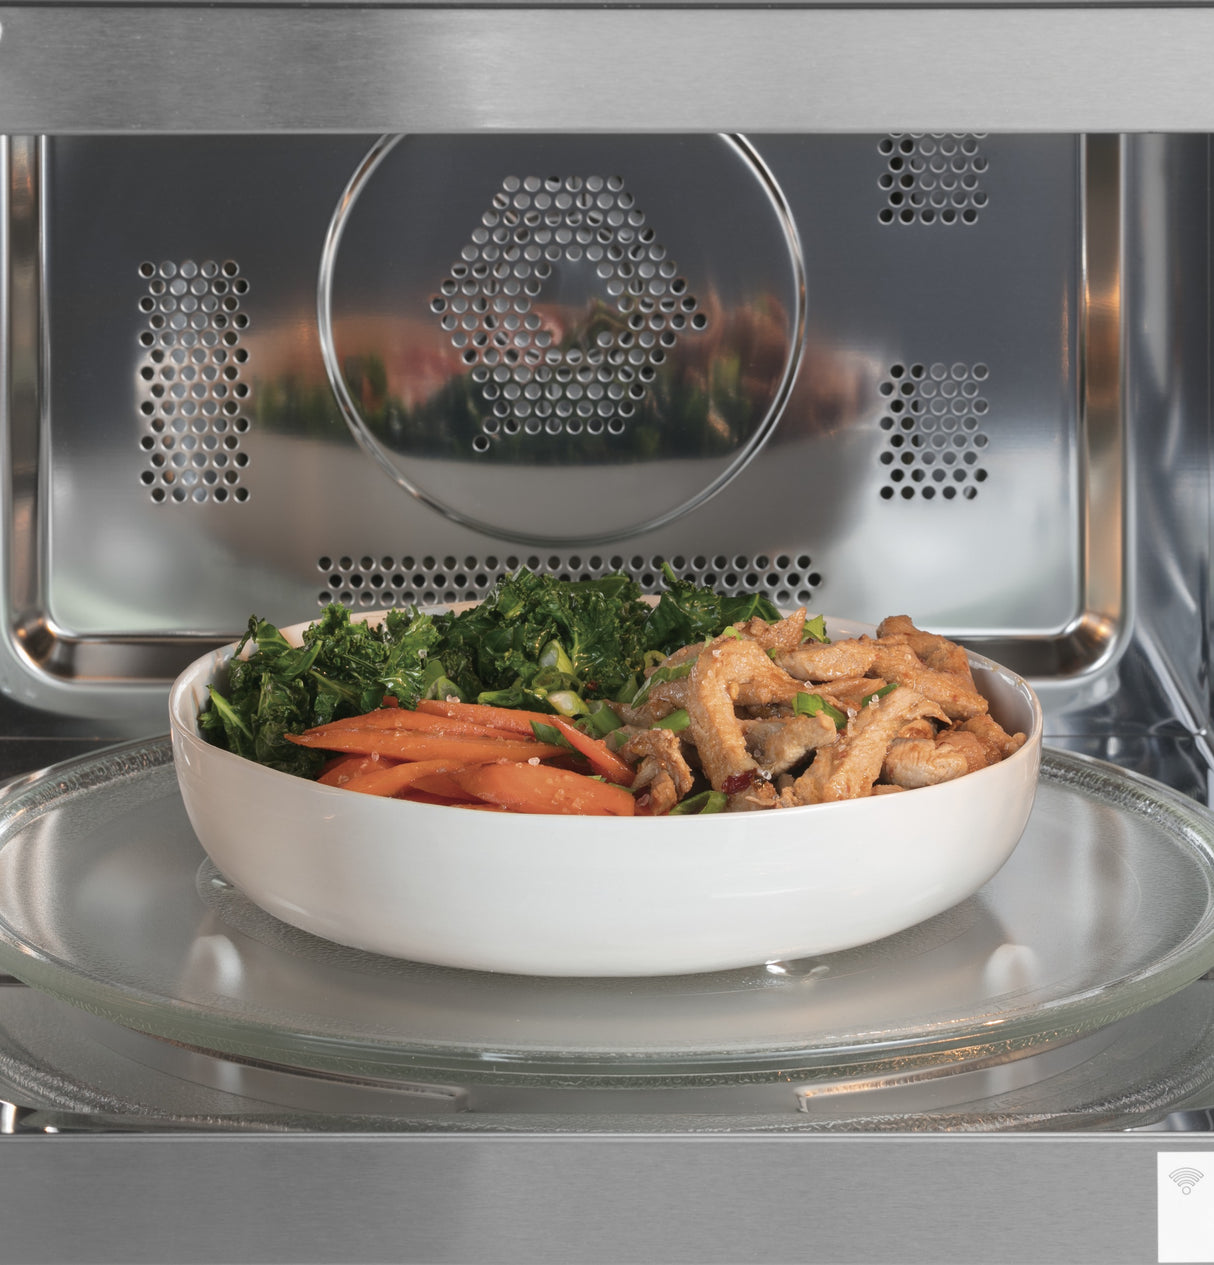 Caf(eback)(TM) 1.5 Cu. Ft. Smart Countertop Convection/Microwave Oven - (CEB515P2NSS)